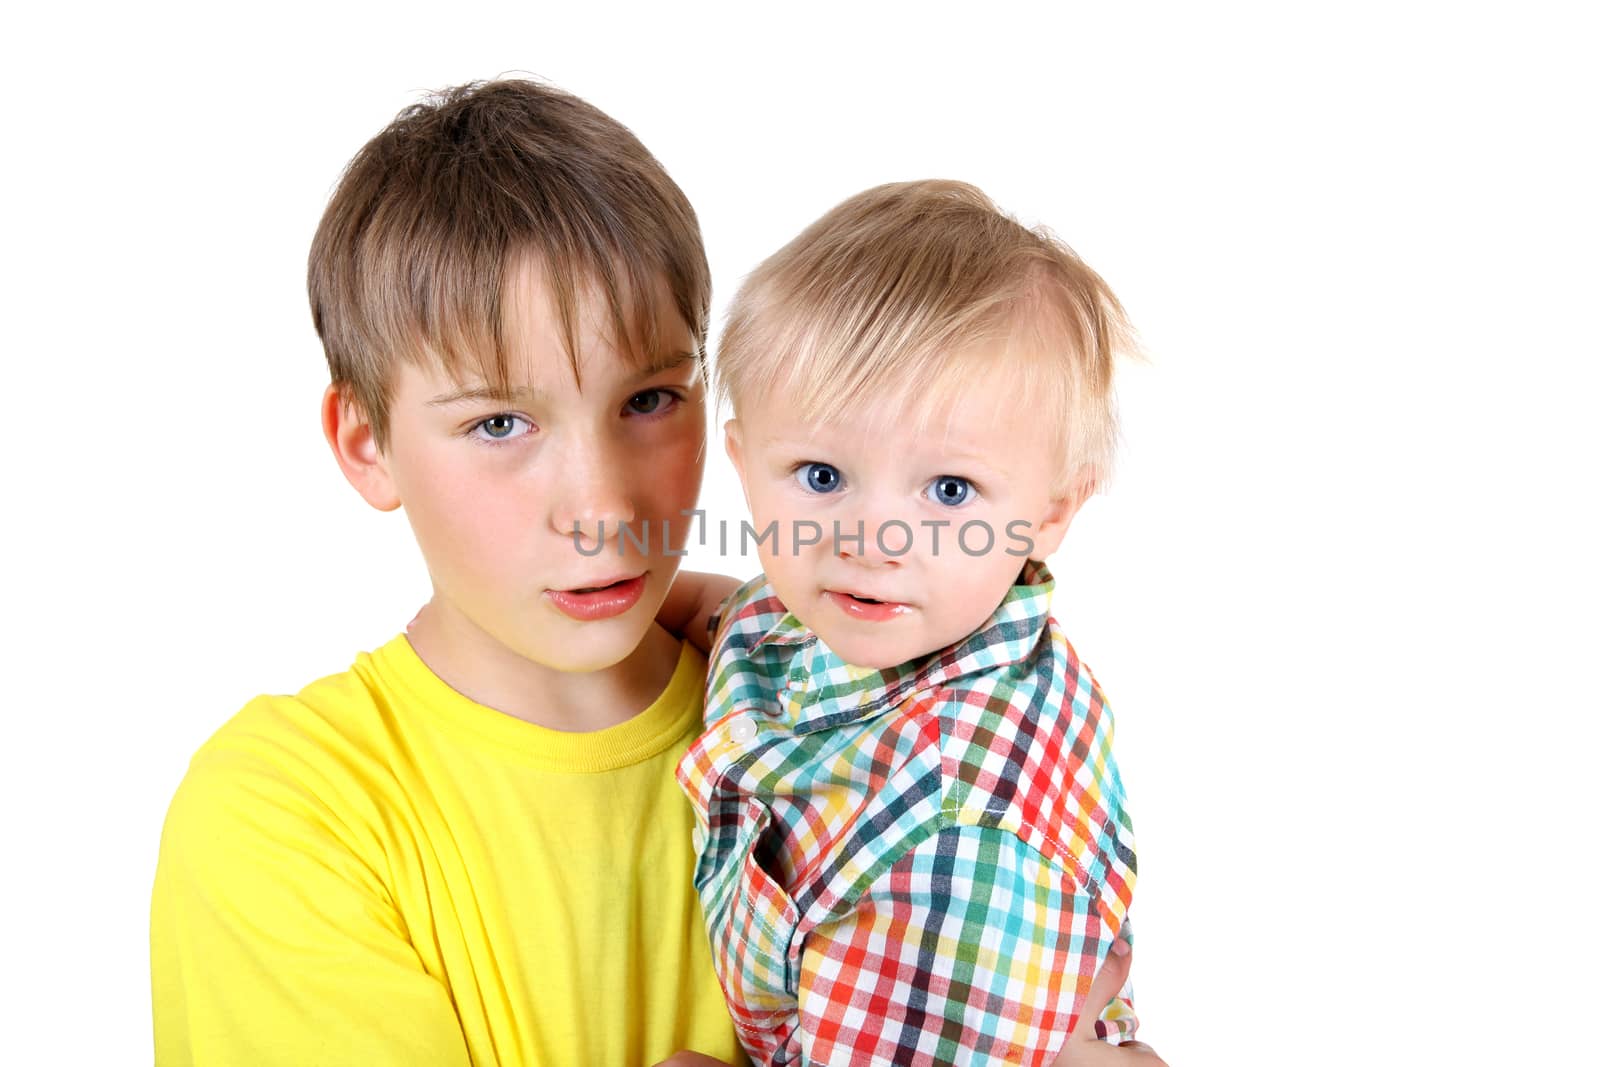 Kid and Baby Boy Portrait Isolated on the White Background